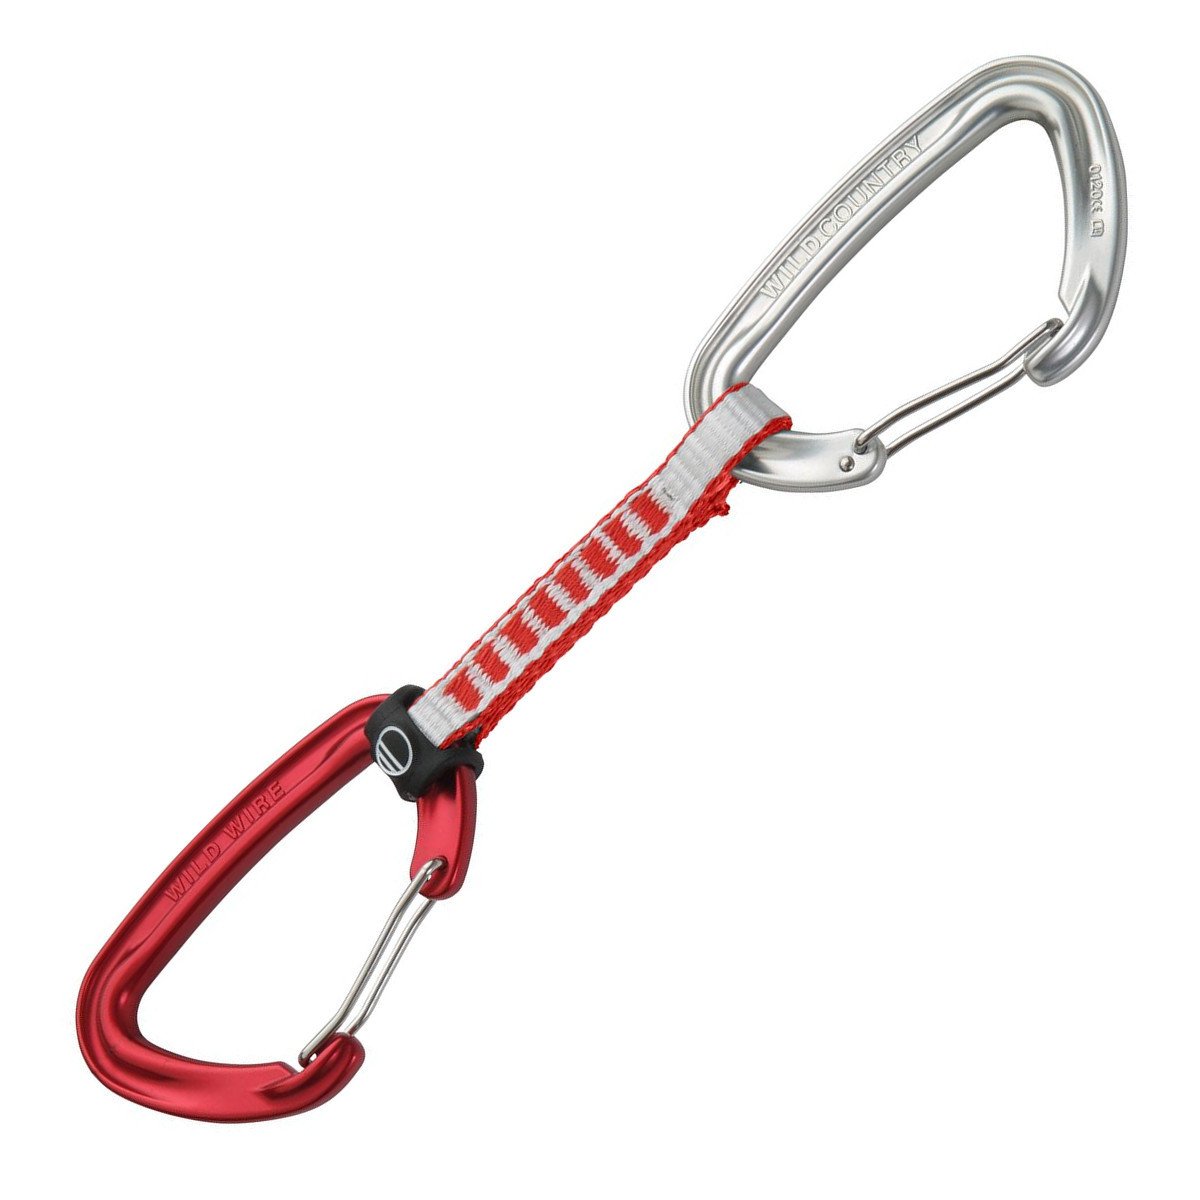 Wild Country Wildwire Quickdraw 10cm, with a red/white sling and silver and red carabiners